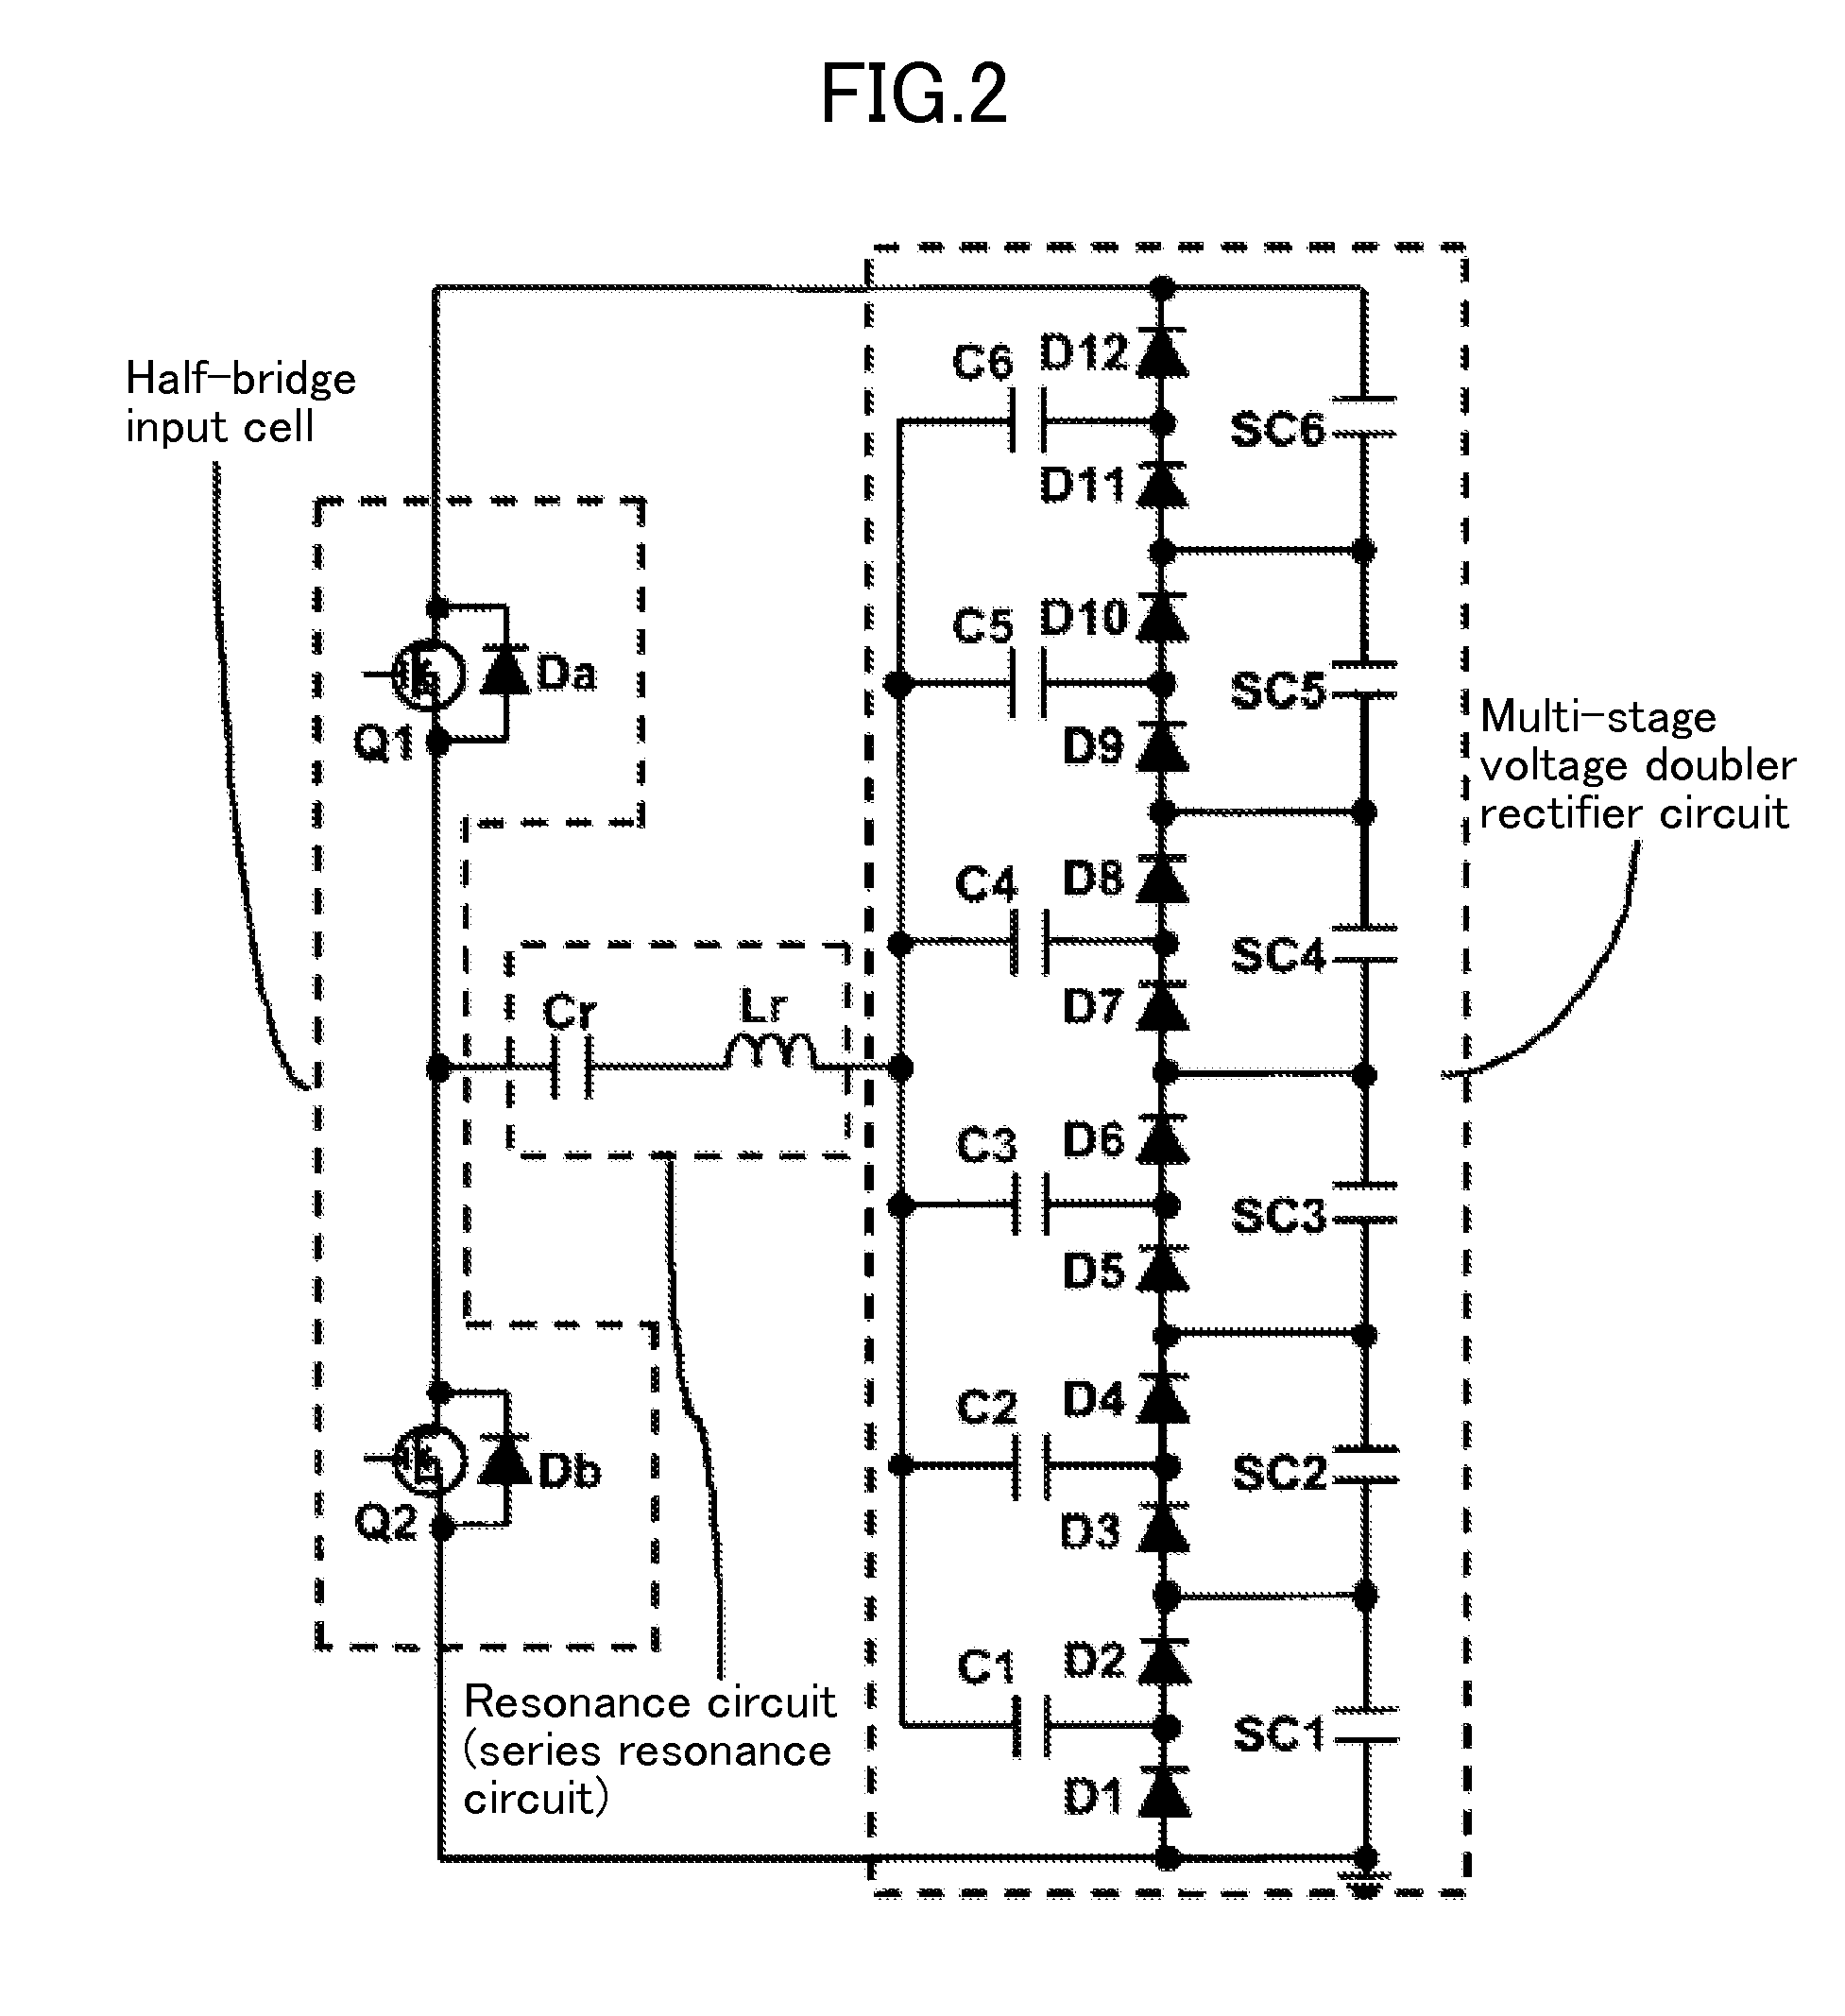 Charge-discharge device with equalization function using both convertor and multi-stage voltage doubler rectifier circuit